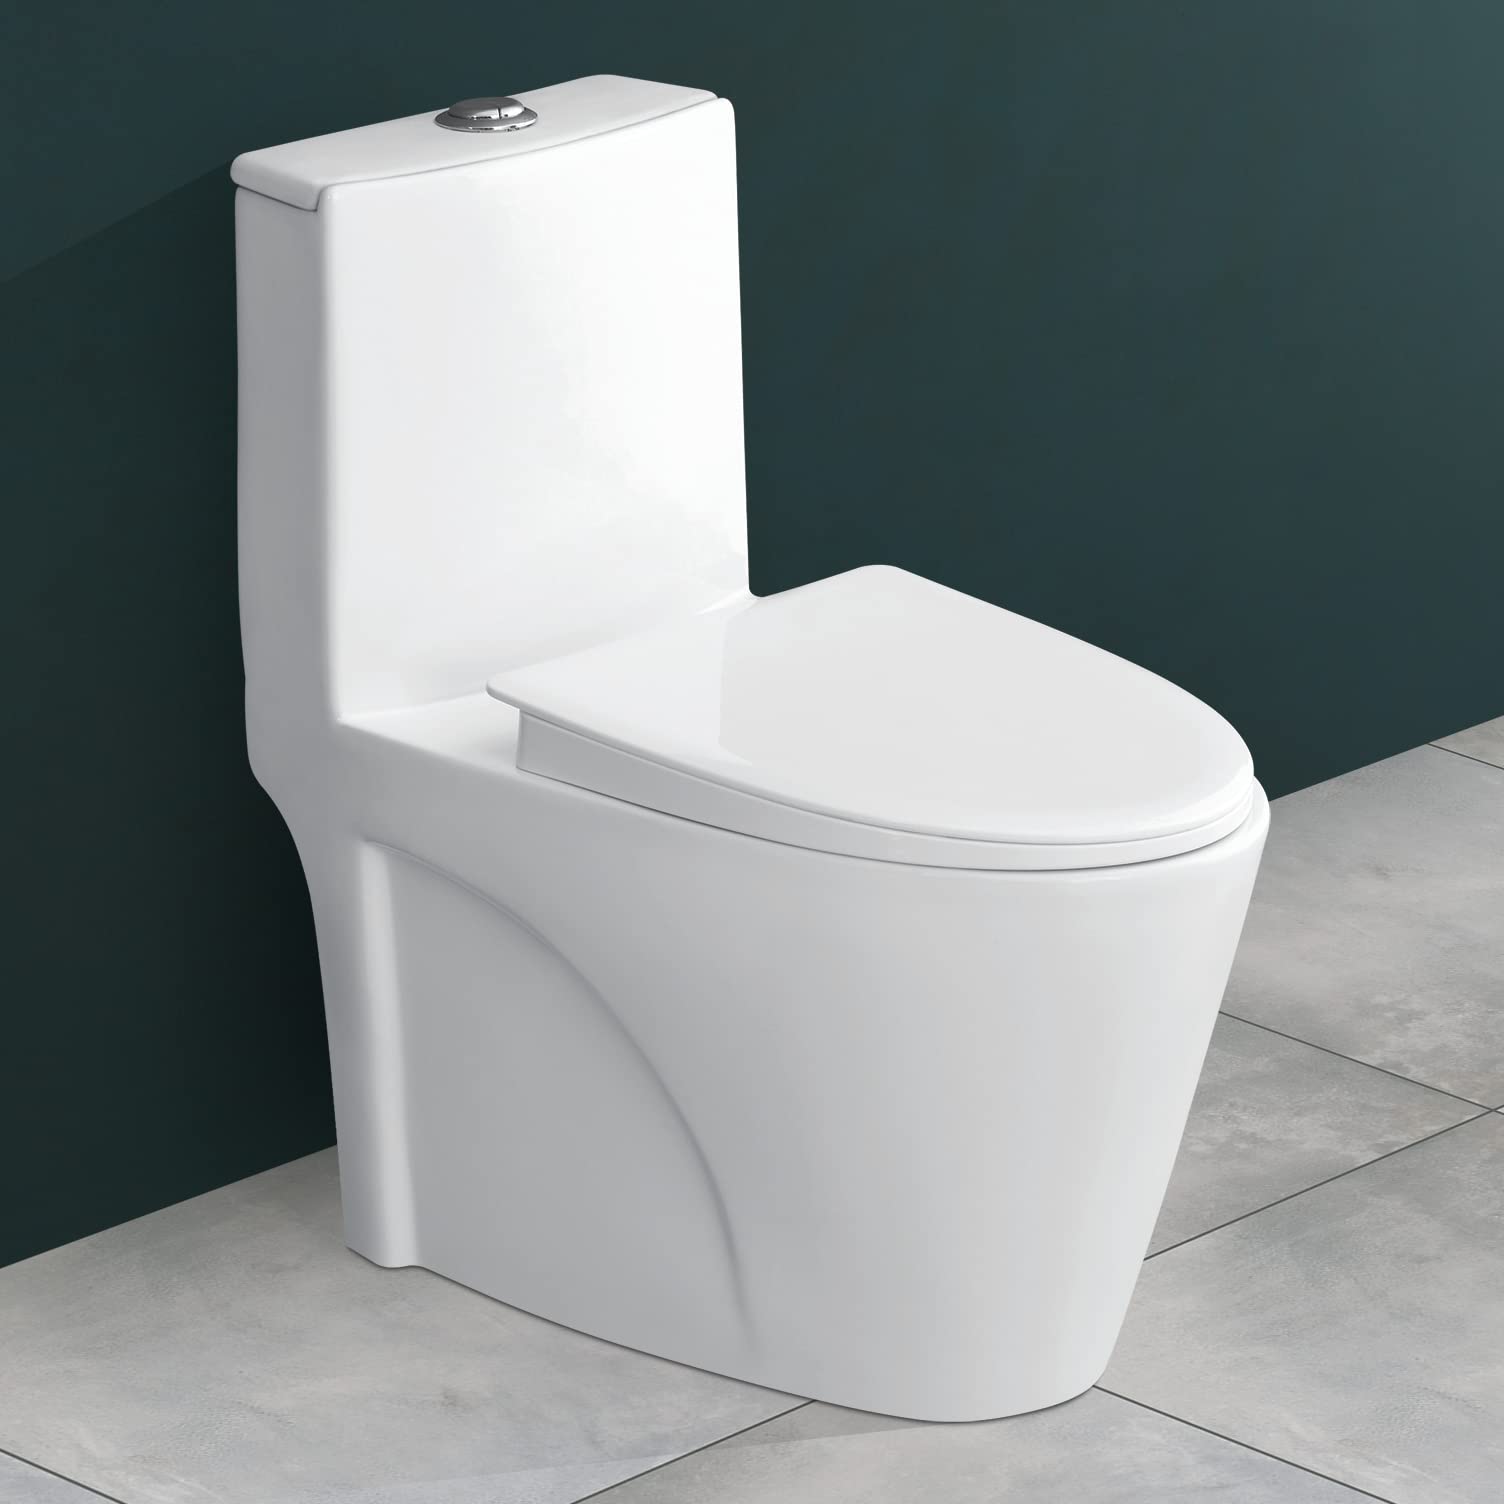 Plantex Platinium Ceramic Rimless One Piece Western Toilet/Water Closet/Commode With Soft Close Toilet Seat - S Trap Outlet (APS-741, White)